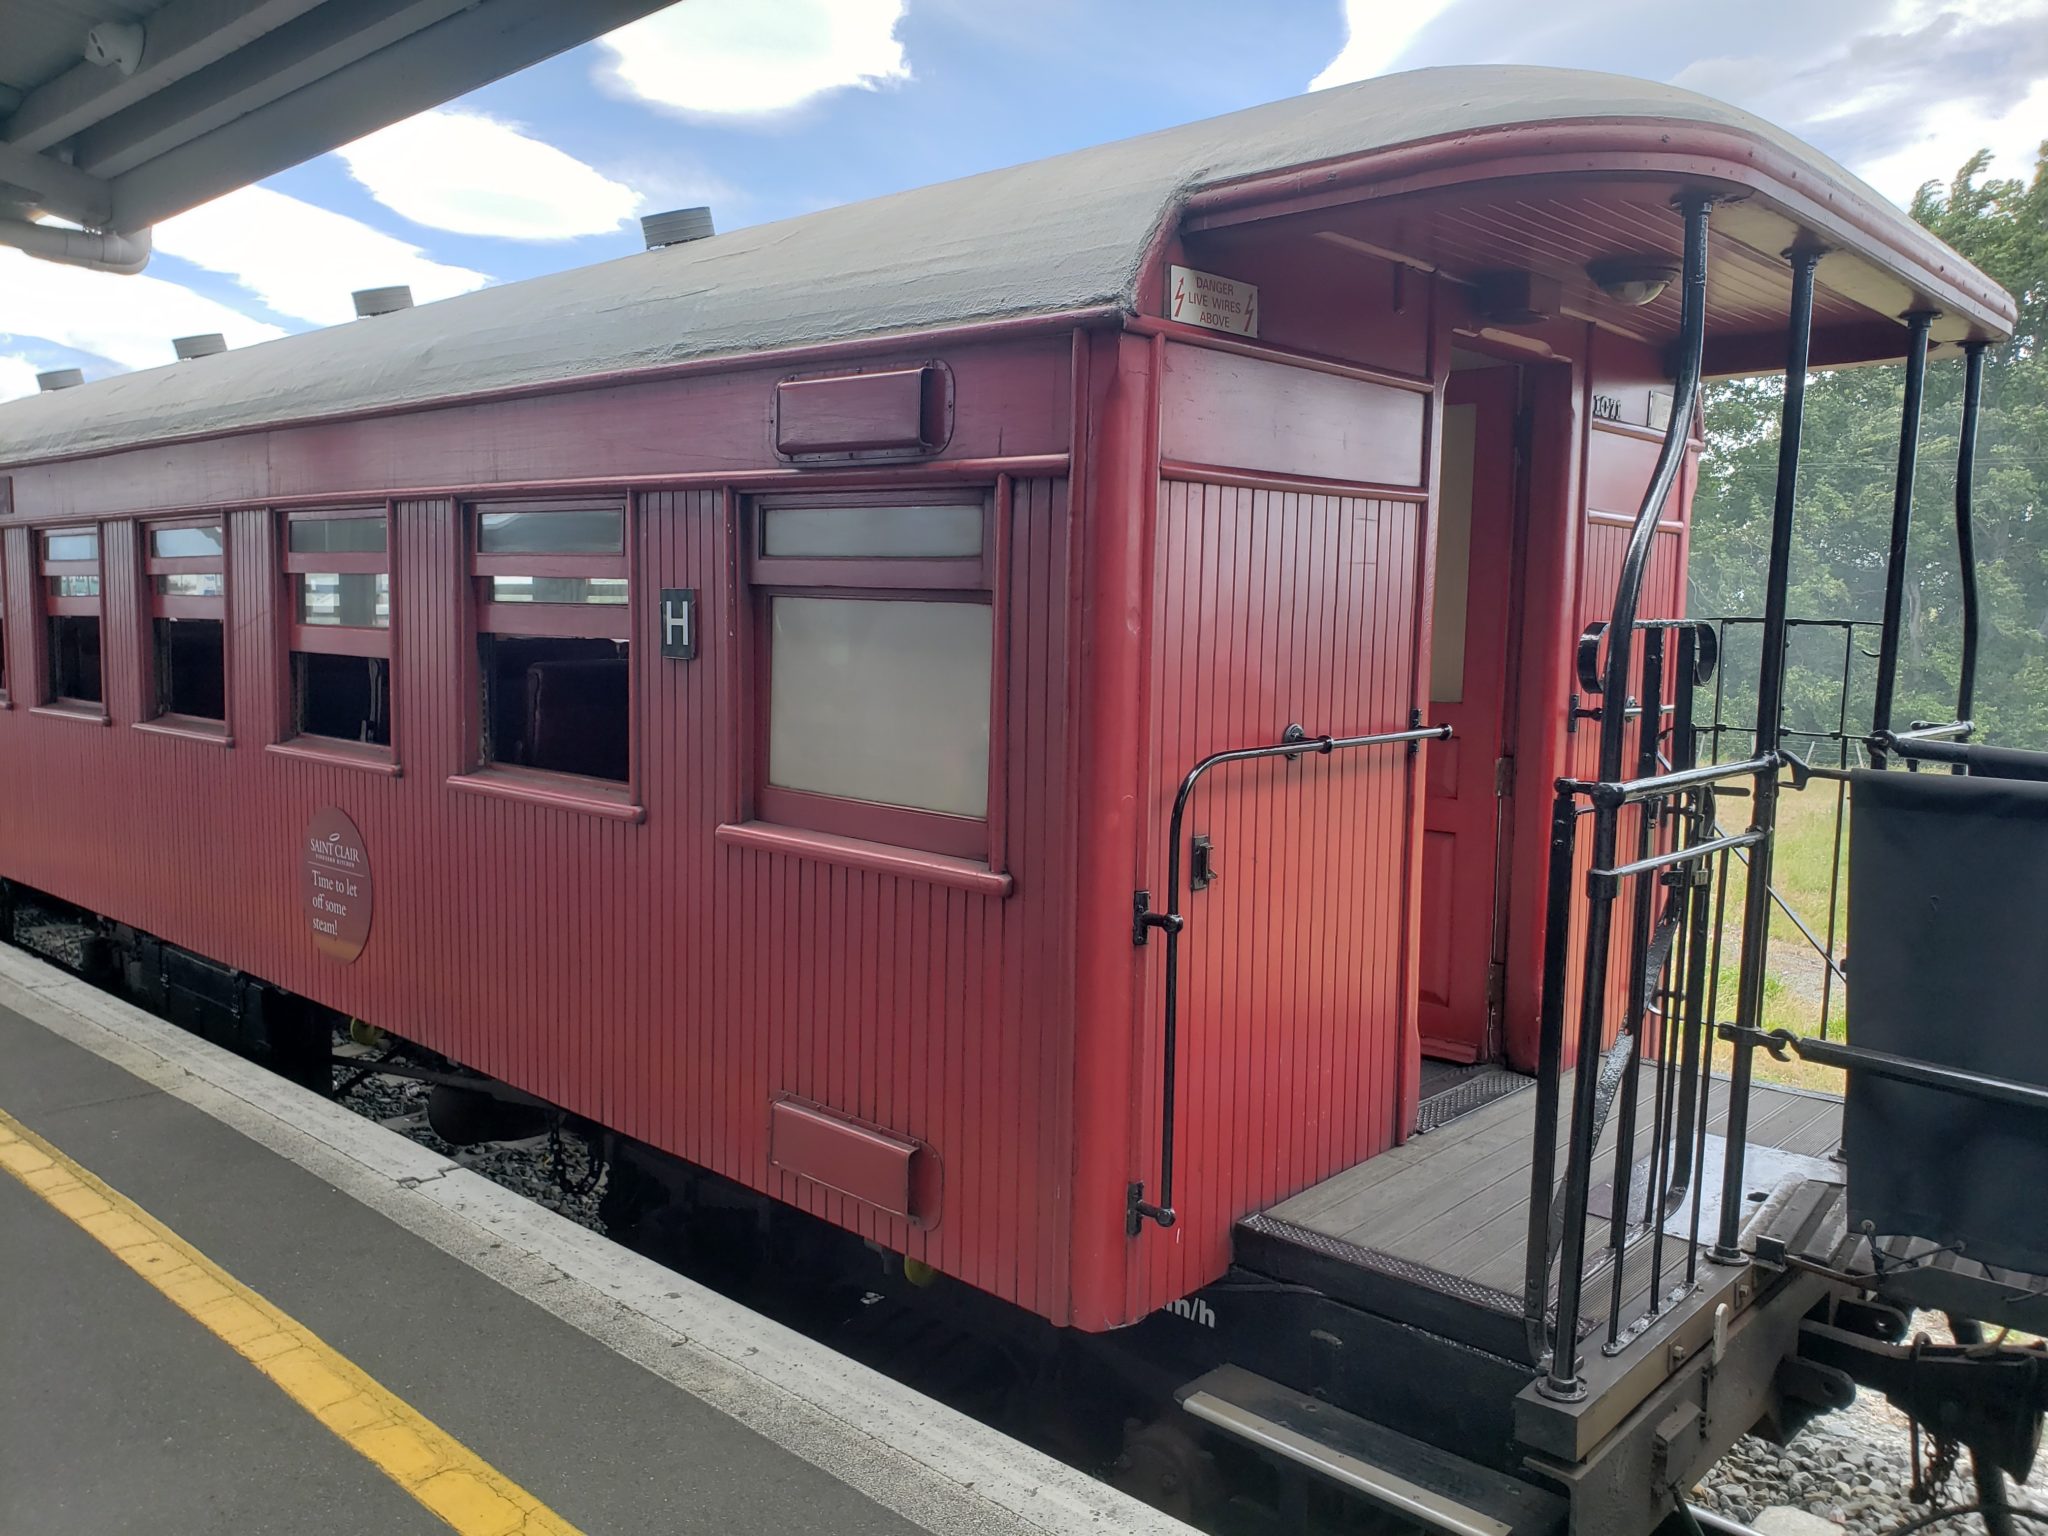 a red train car at a station